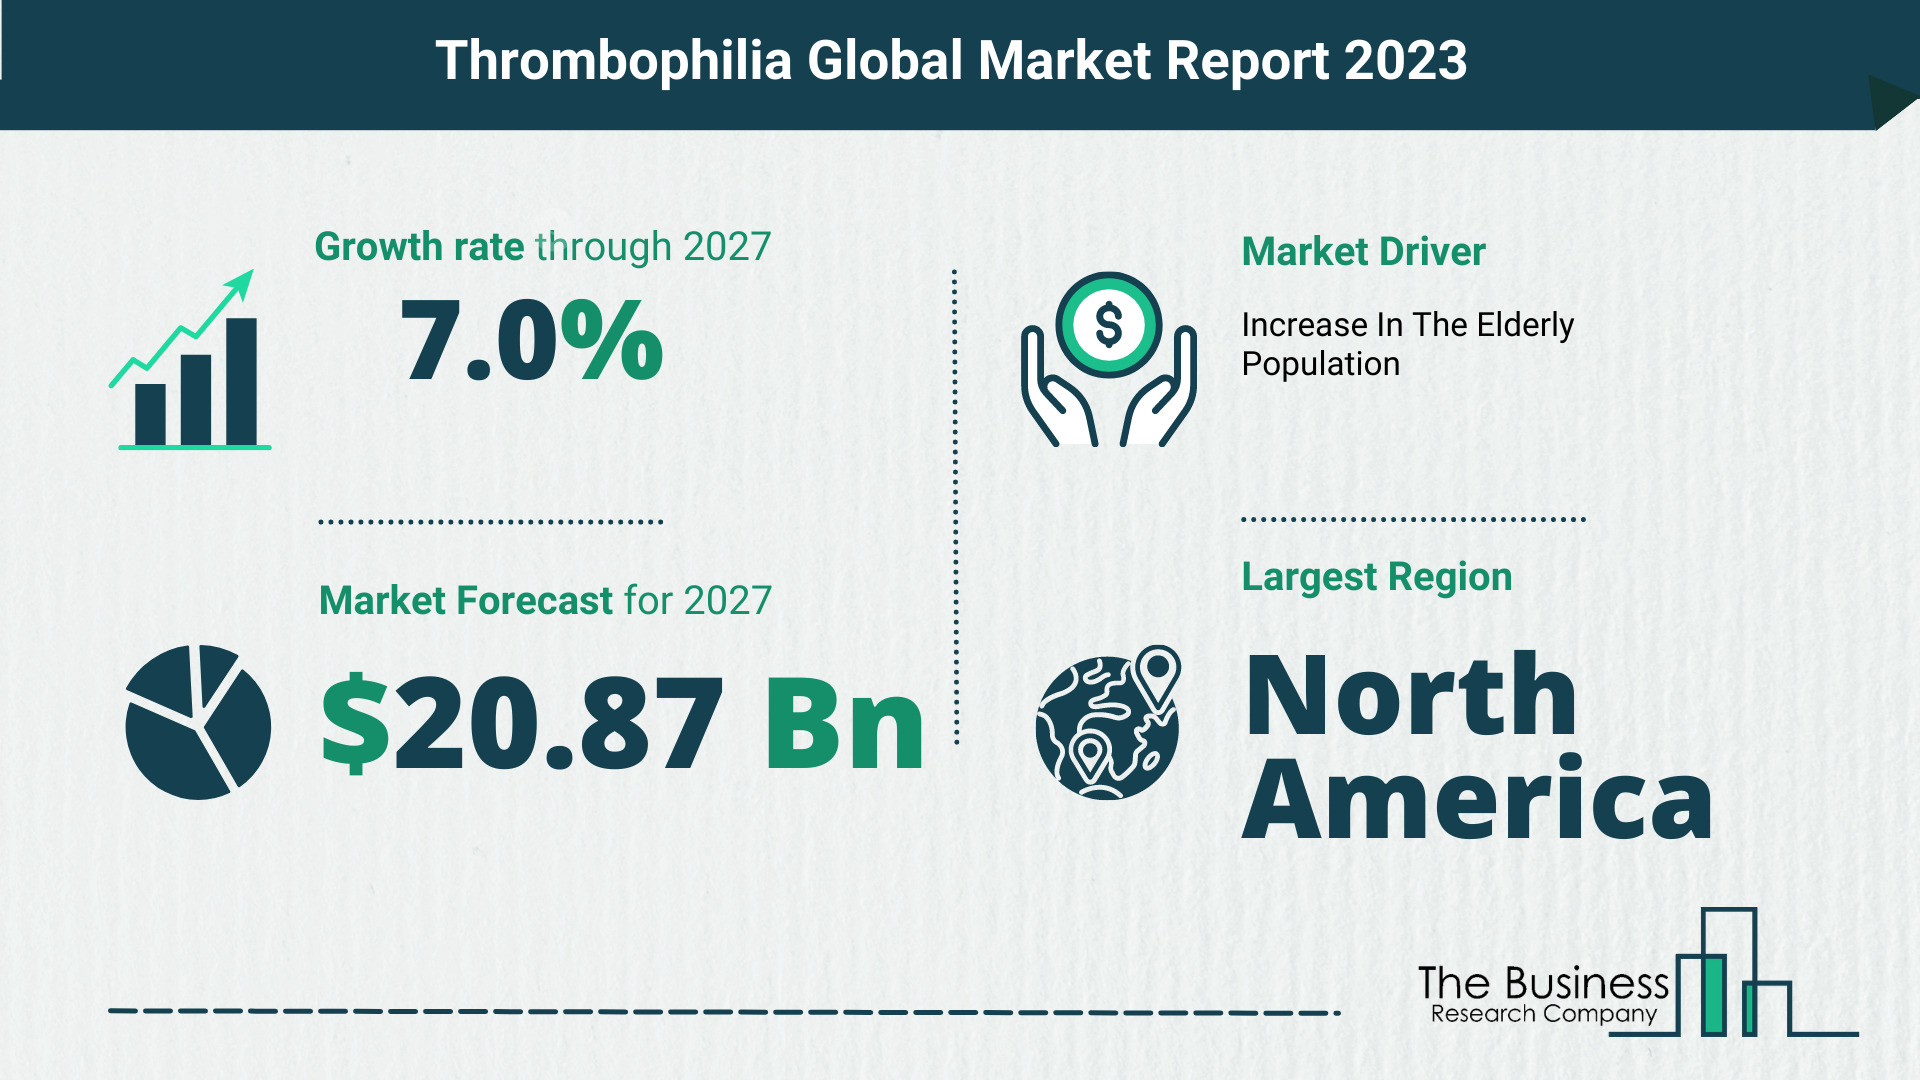 What Will The Thrombophilia Market Look Like In 2023?